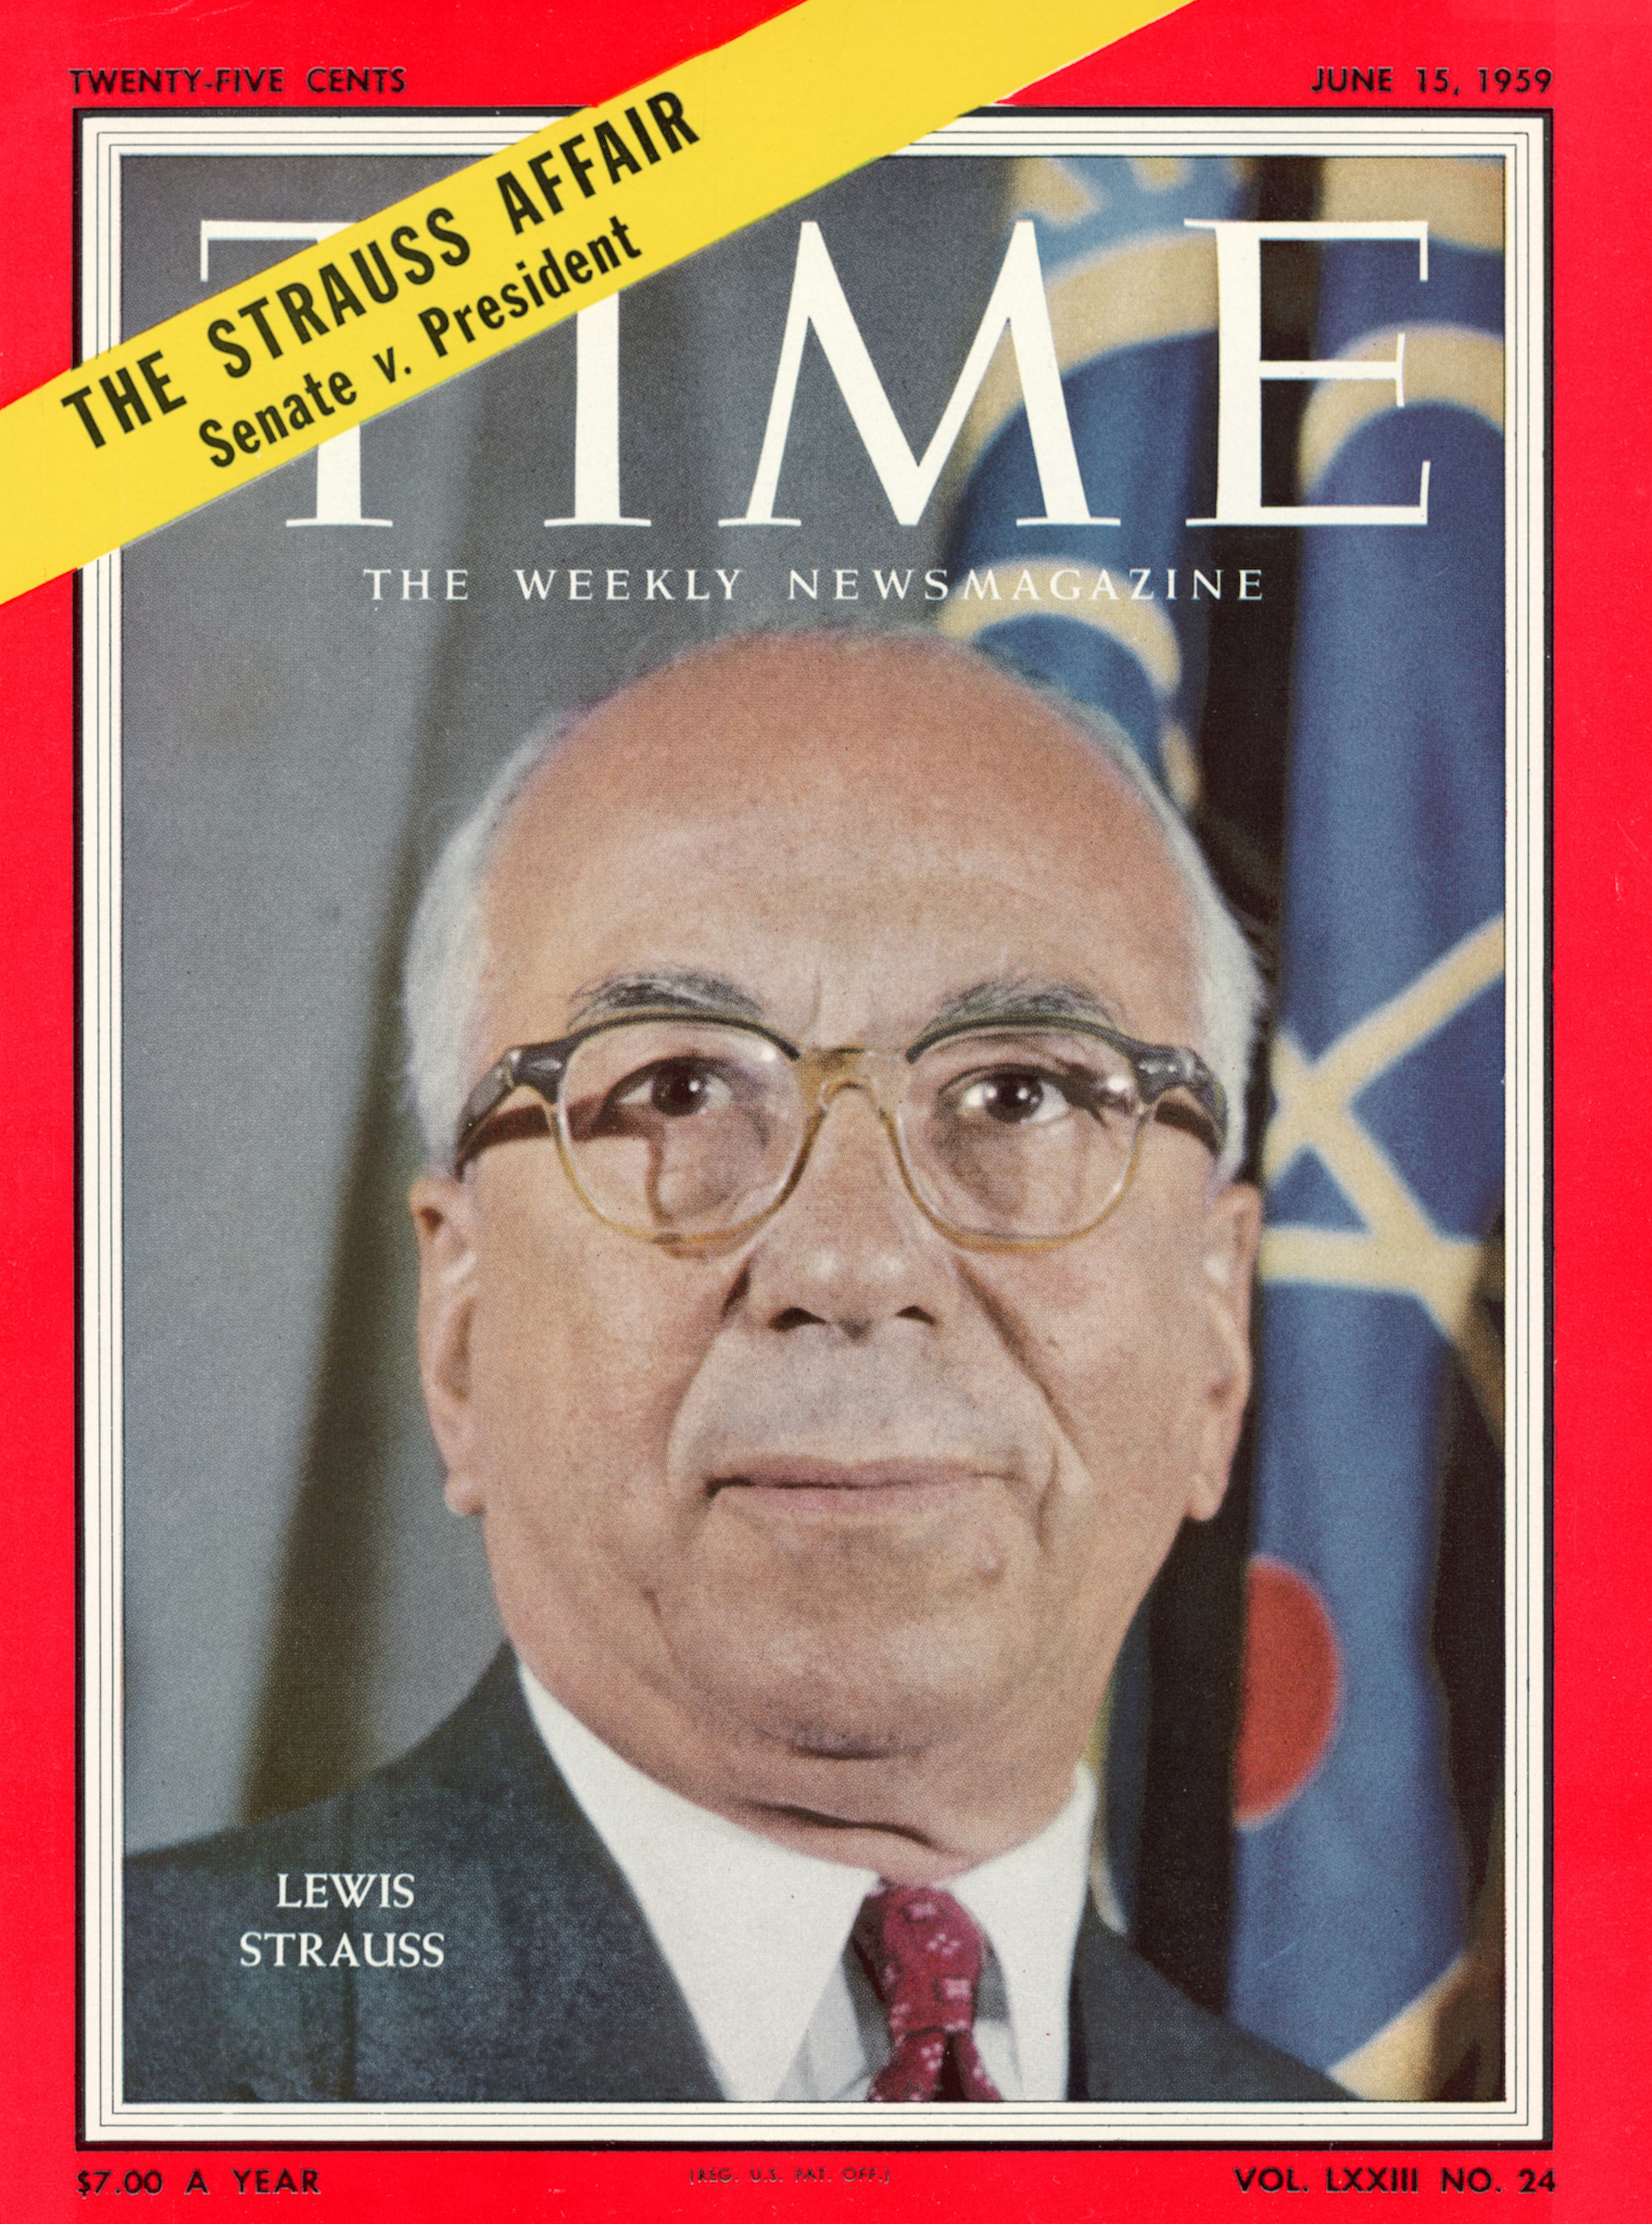 The Real TIME Magazine Covers Featured in Oppenheimer